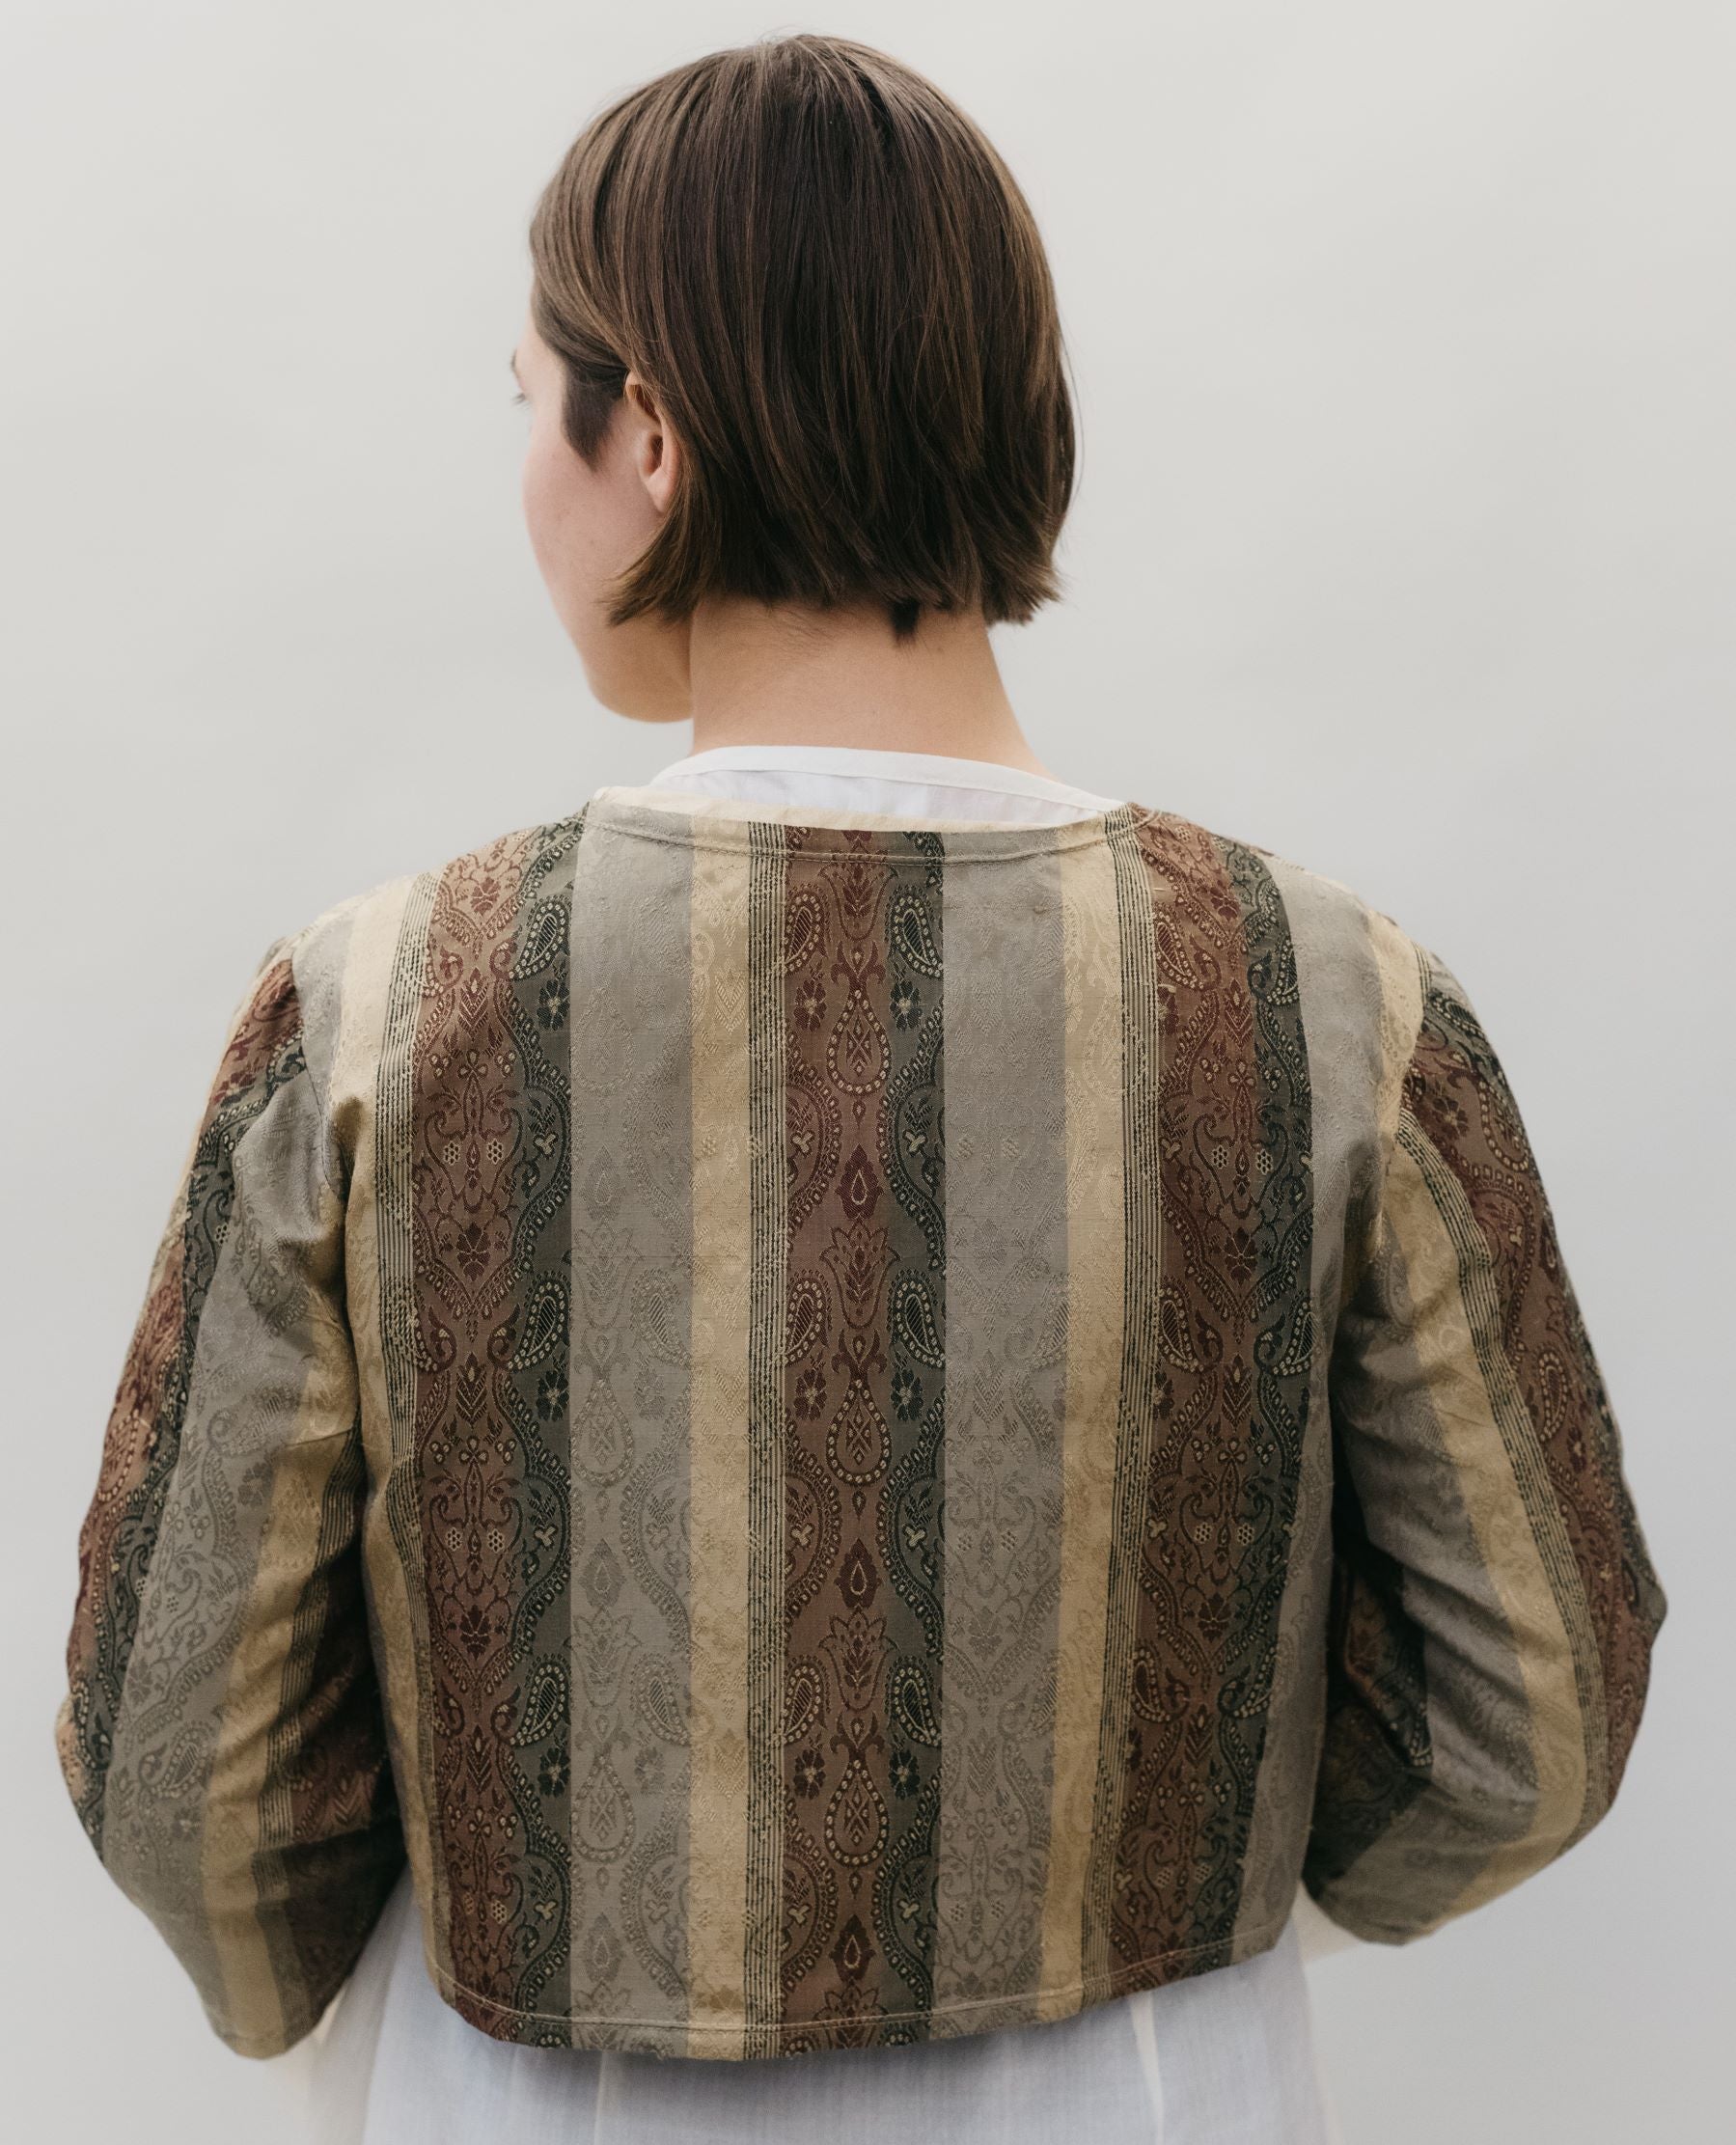 Photo of the back of the Jacket.  Jacket is shown over the Entari (tunic)